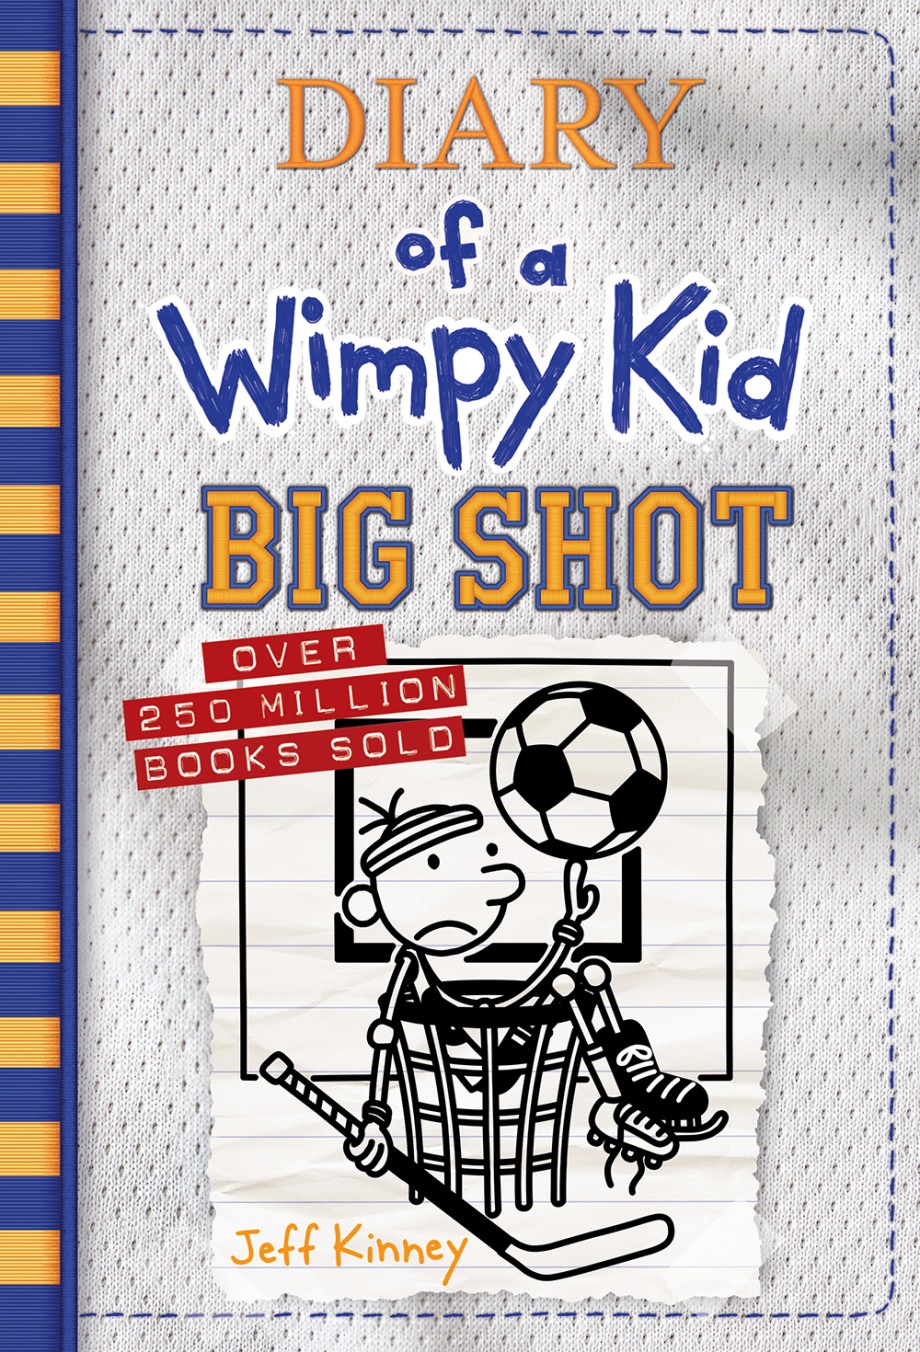 Big Shot (Diary of a Wimpy Kid #16) 